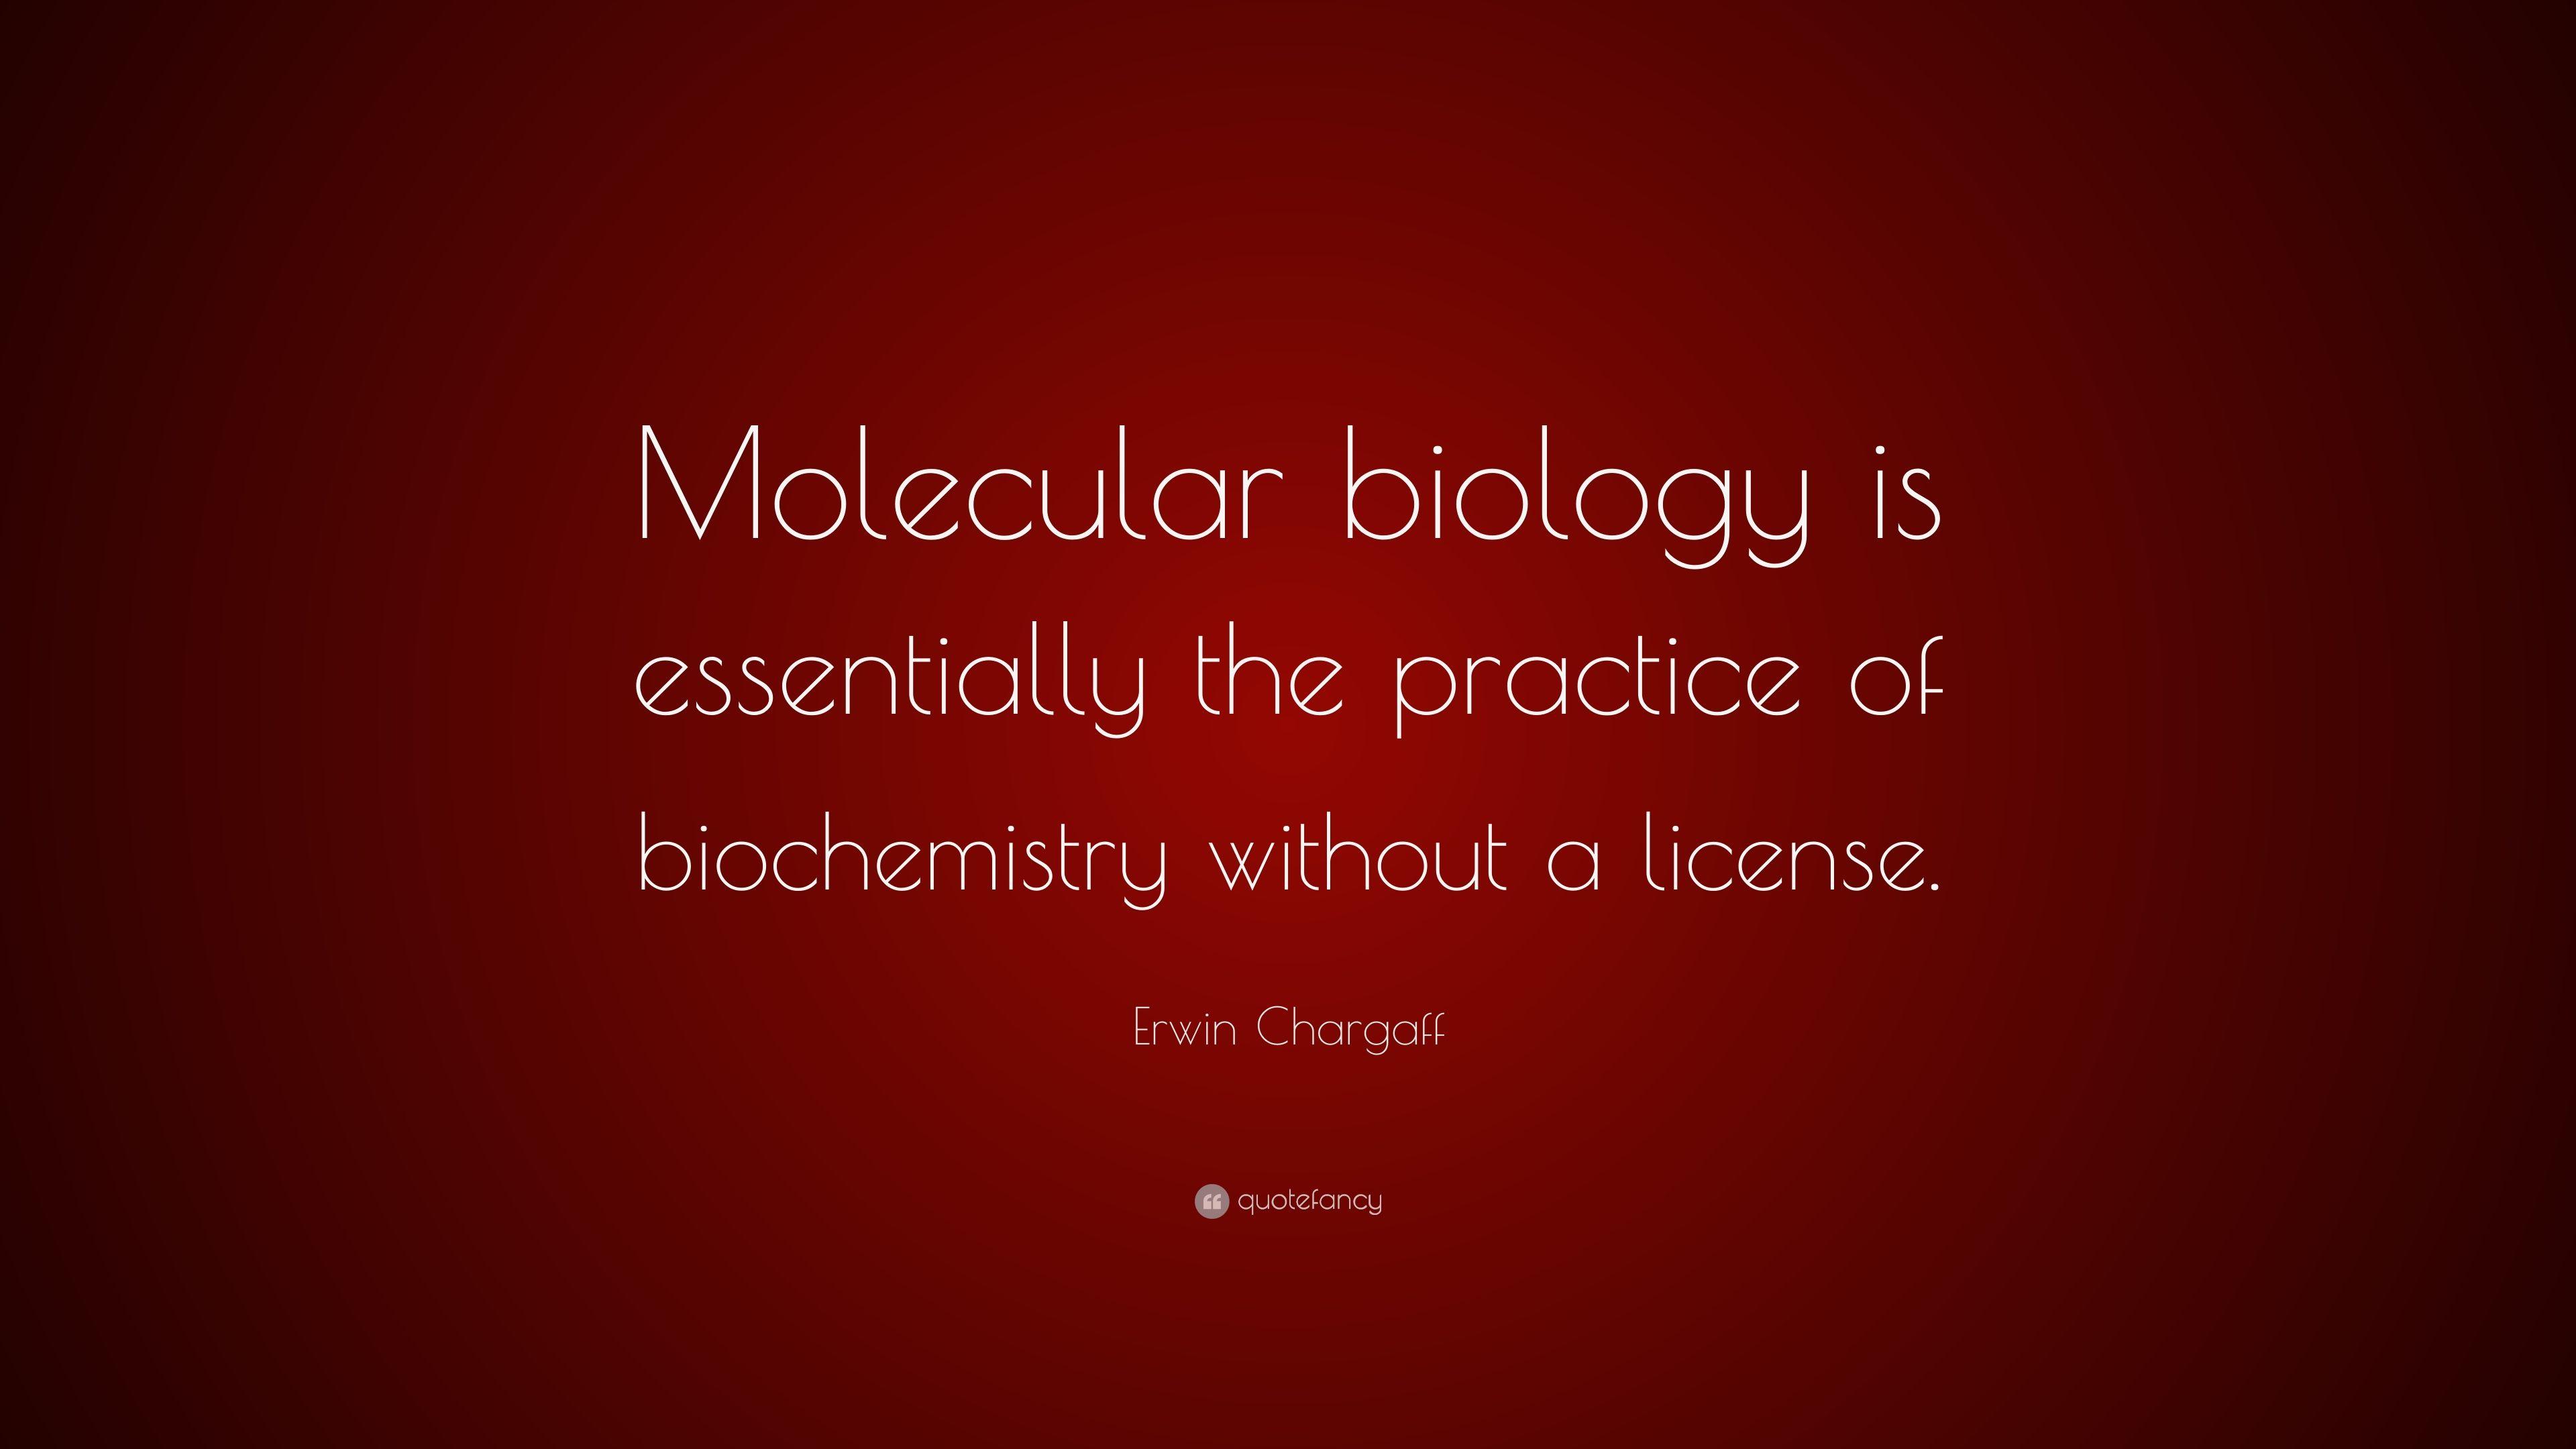 Erwin Chargaff Quote: “Molecular biology is essentially